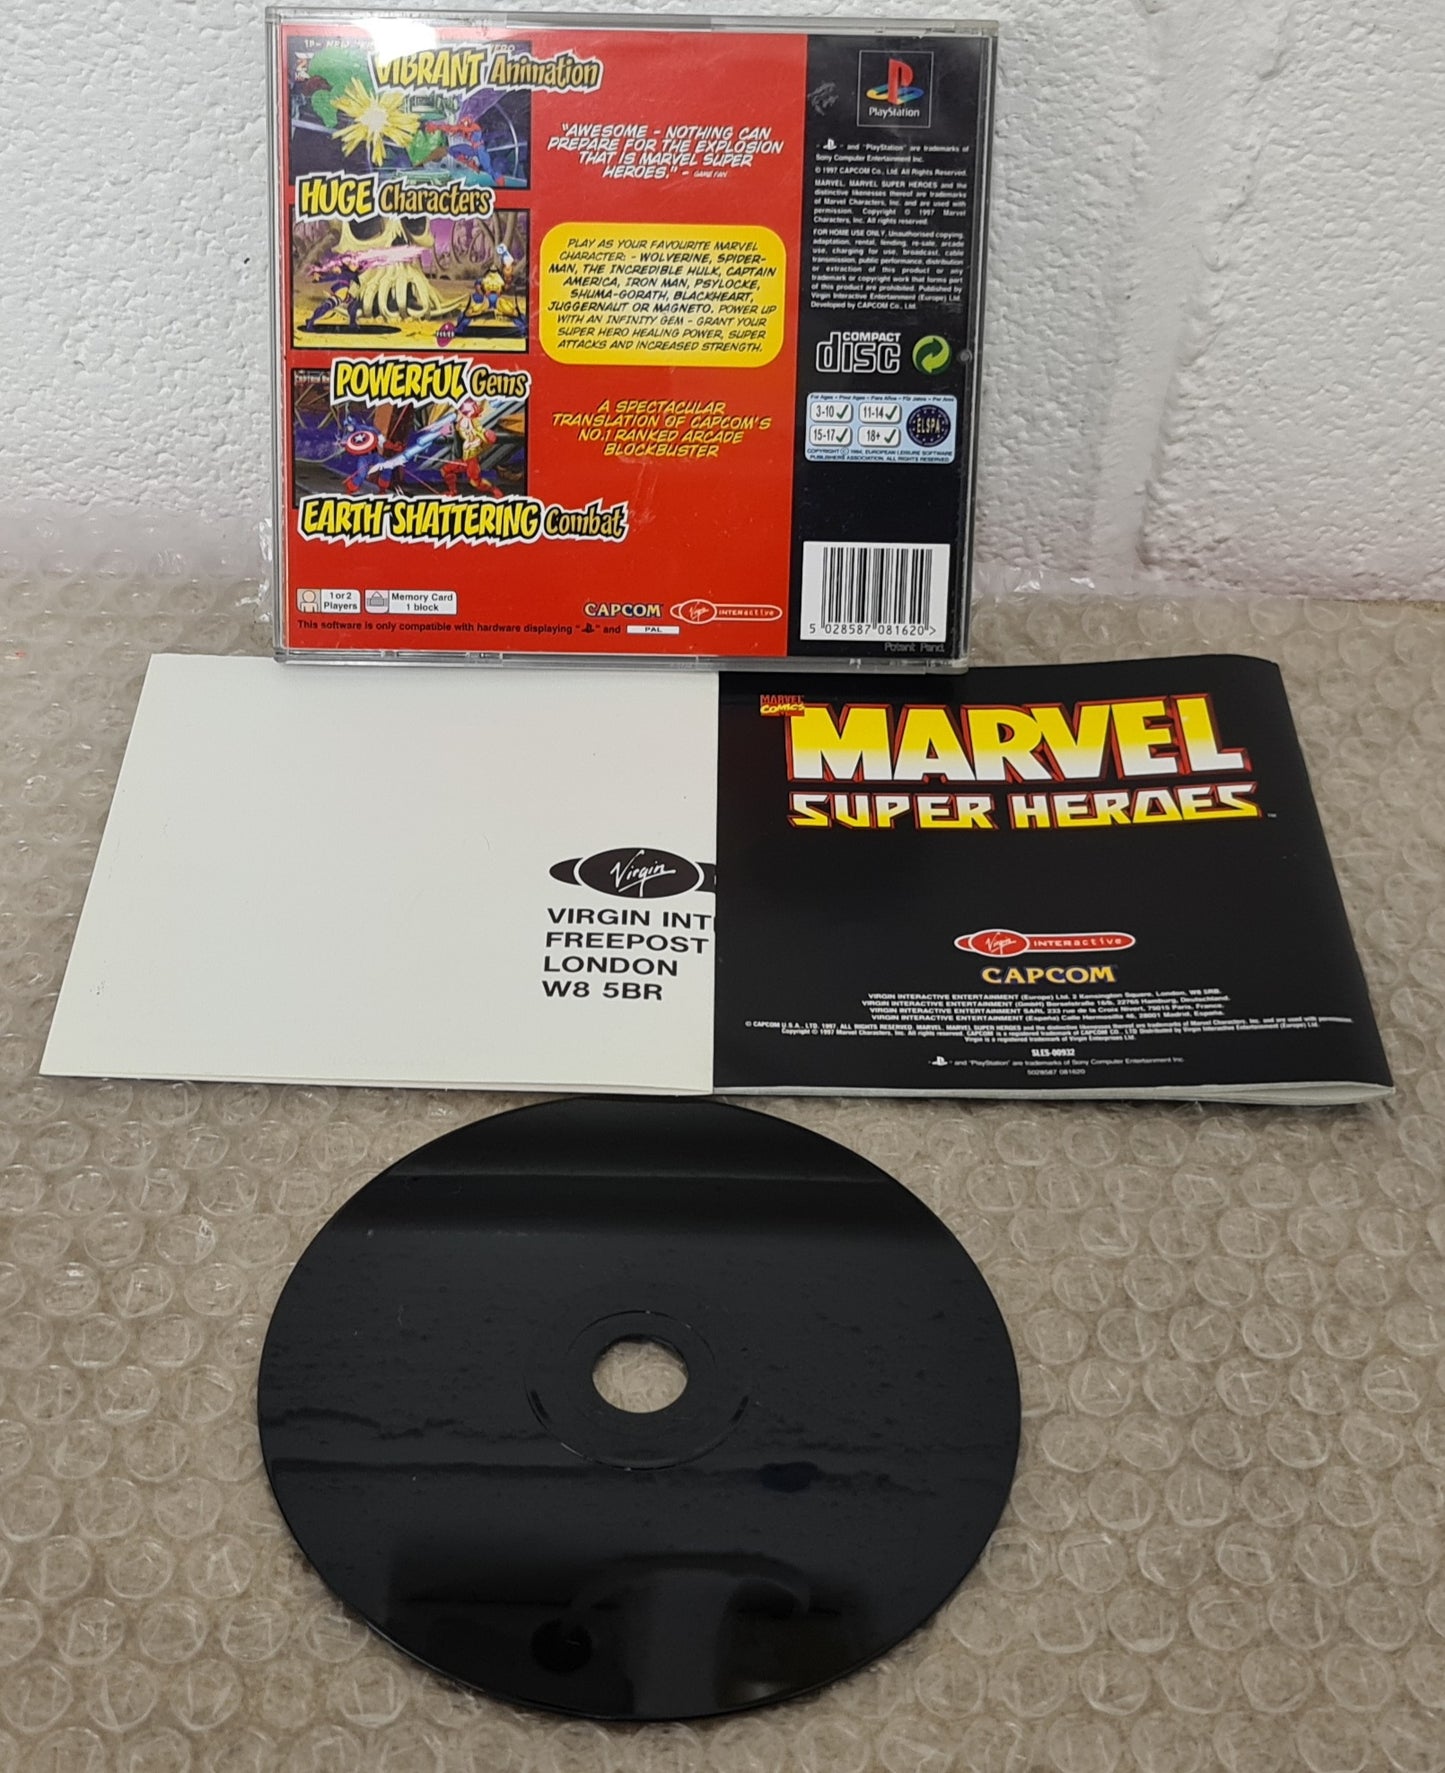 Marvel Super Heroes Sony Playstation 1 (PS1) RARE Game